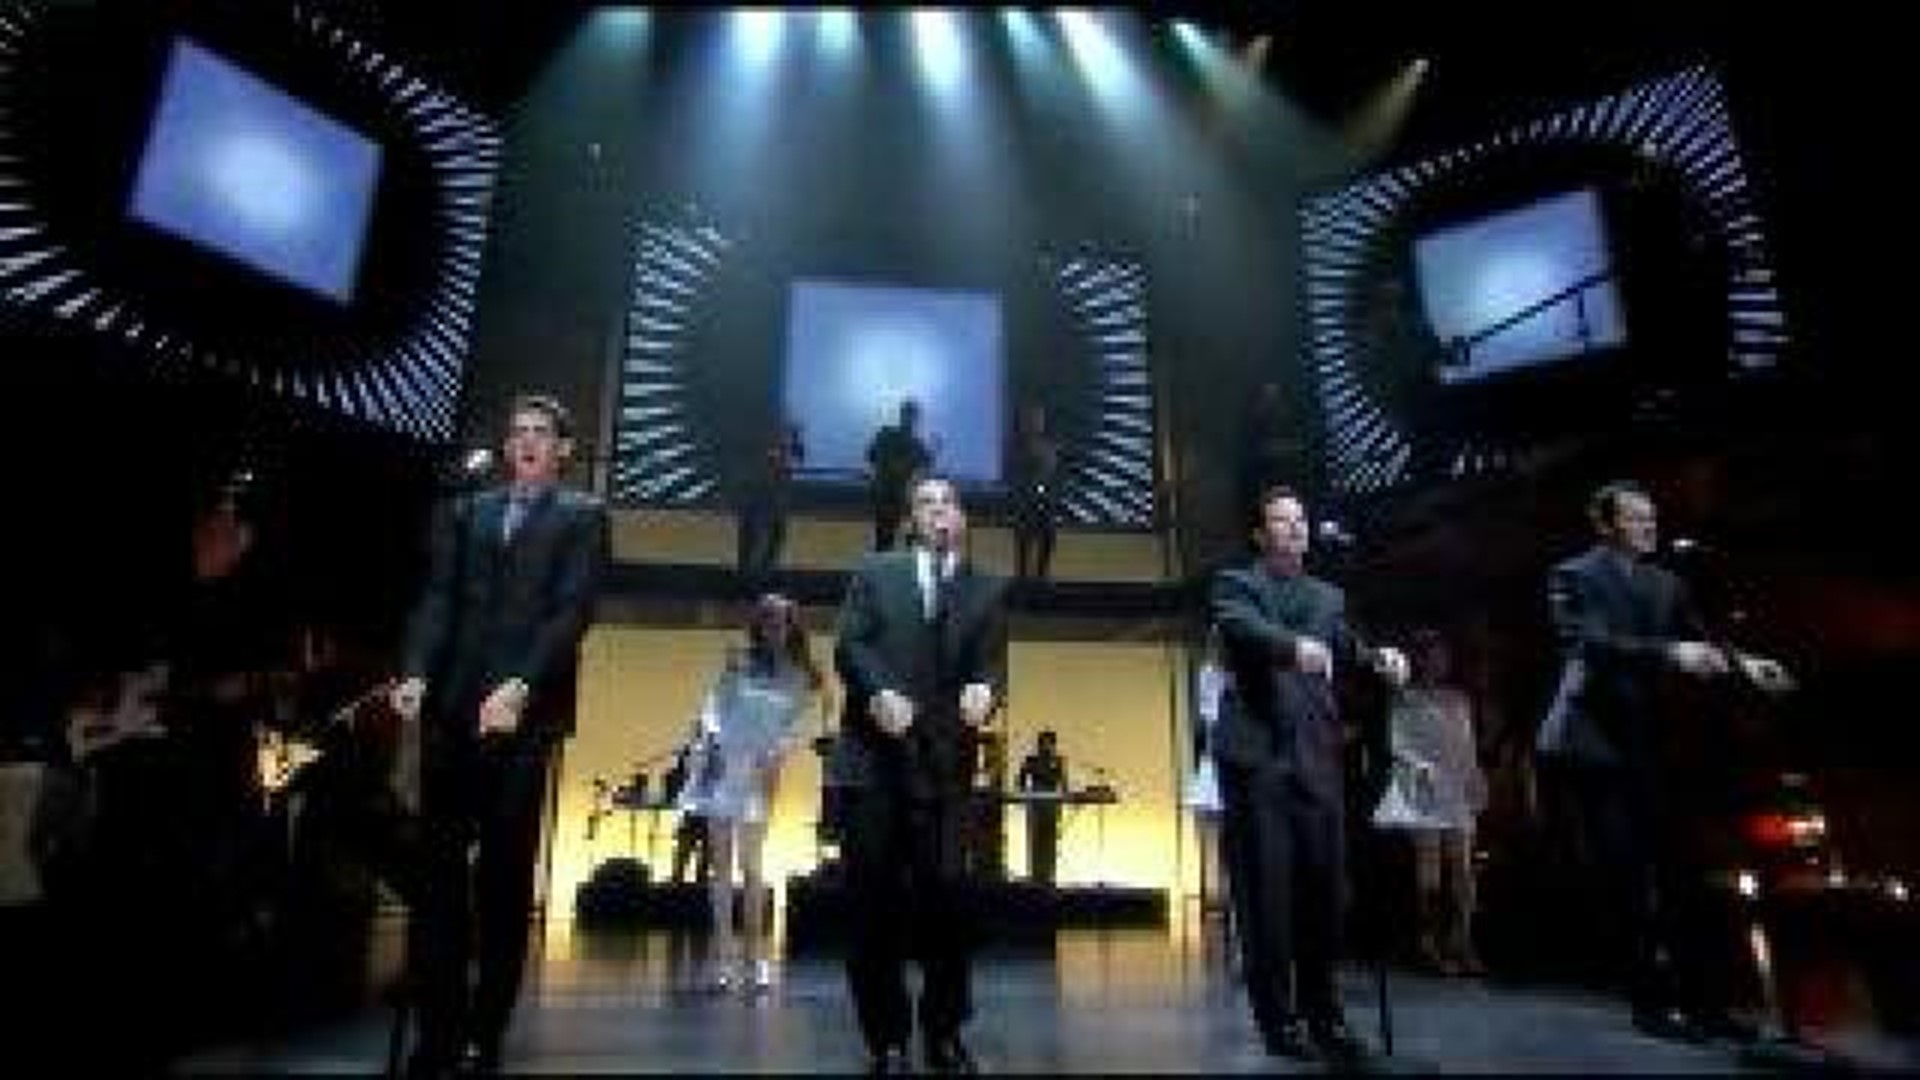 Jersey Boys Ticket Holders Want A Refund